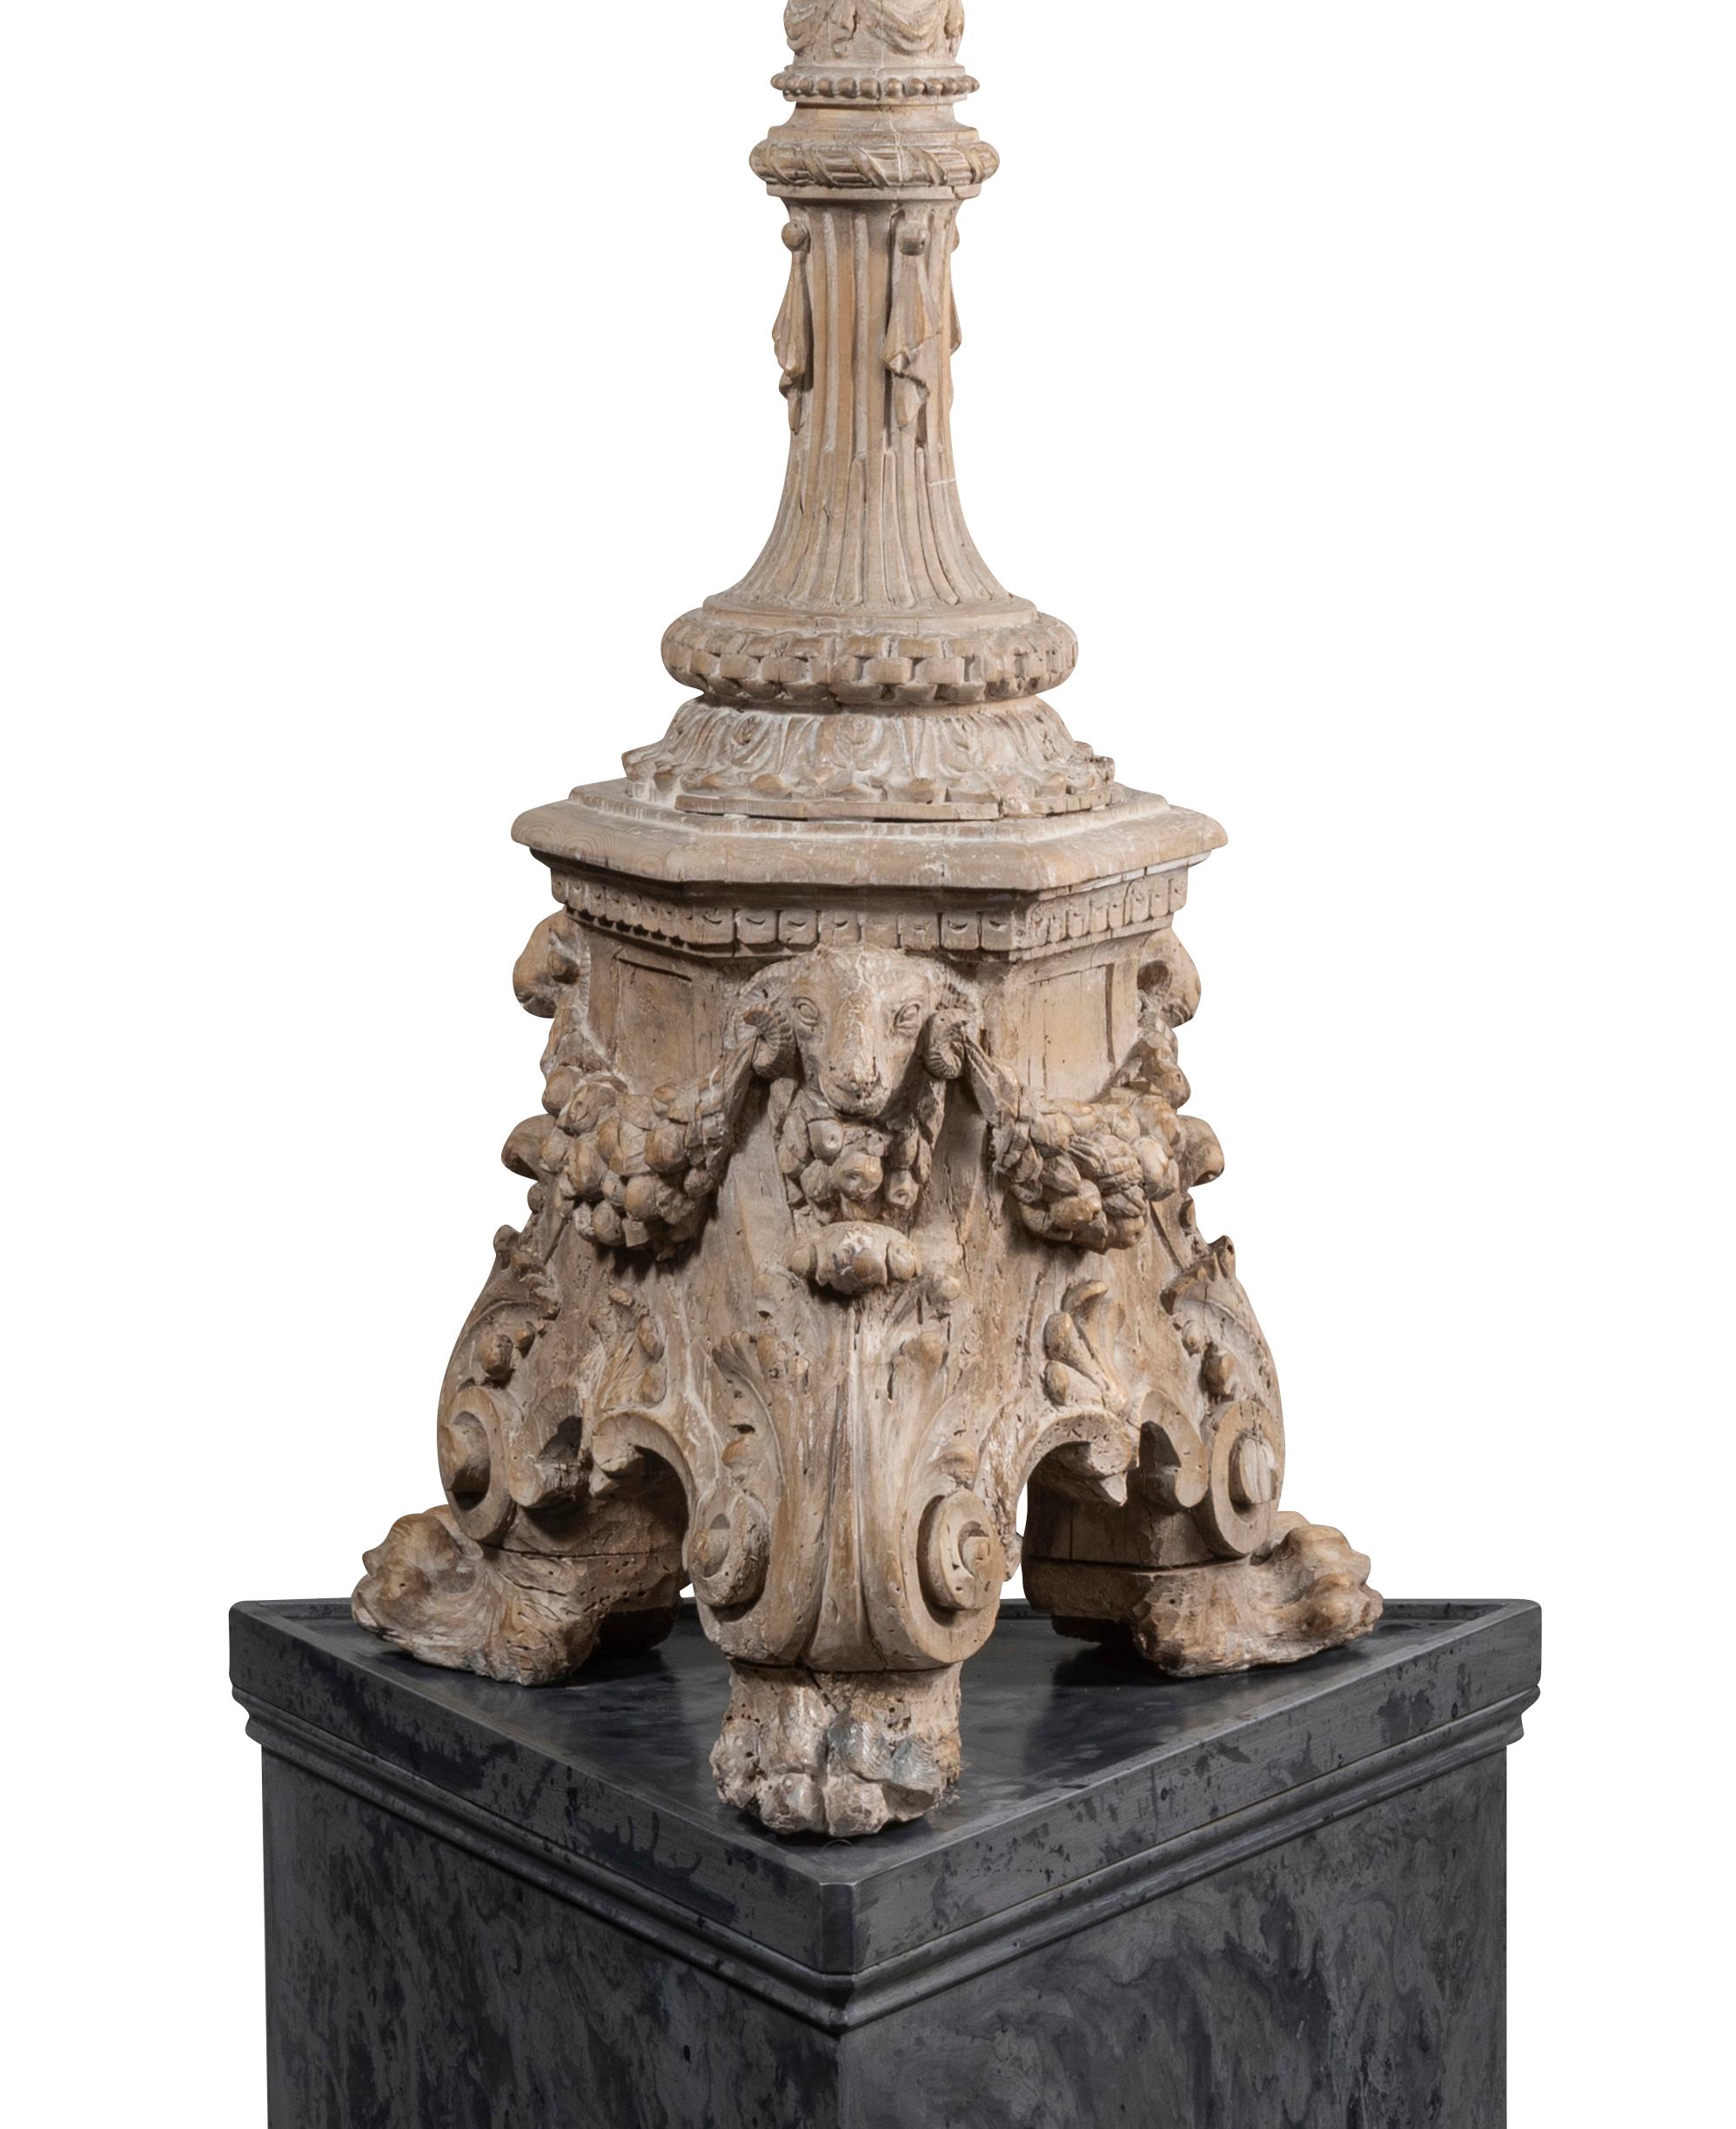 Each with foliated metal drip trays atop the multi baluster stem, the gadrooned capital on fluted column, the central frieze of putti holding fillets and floral garlands, the lower column with swags, drapery pendants; the molding with bead and reel,